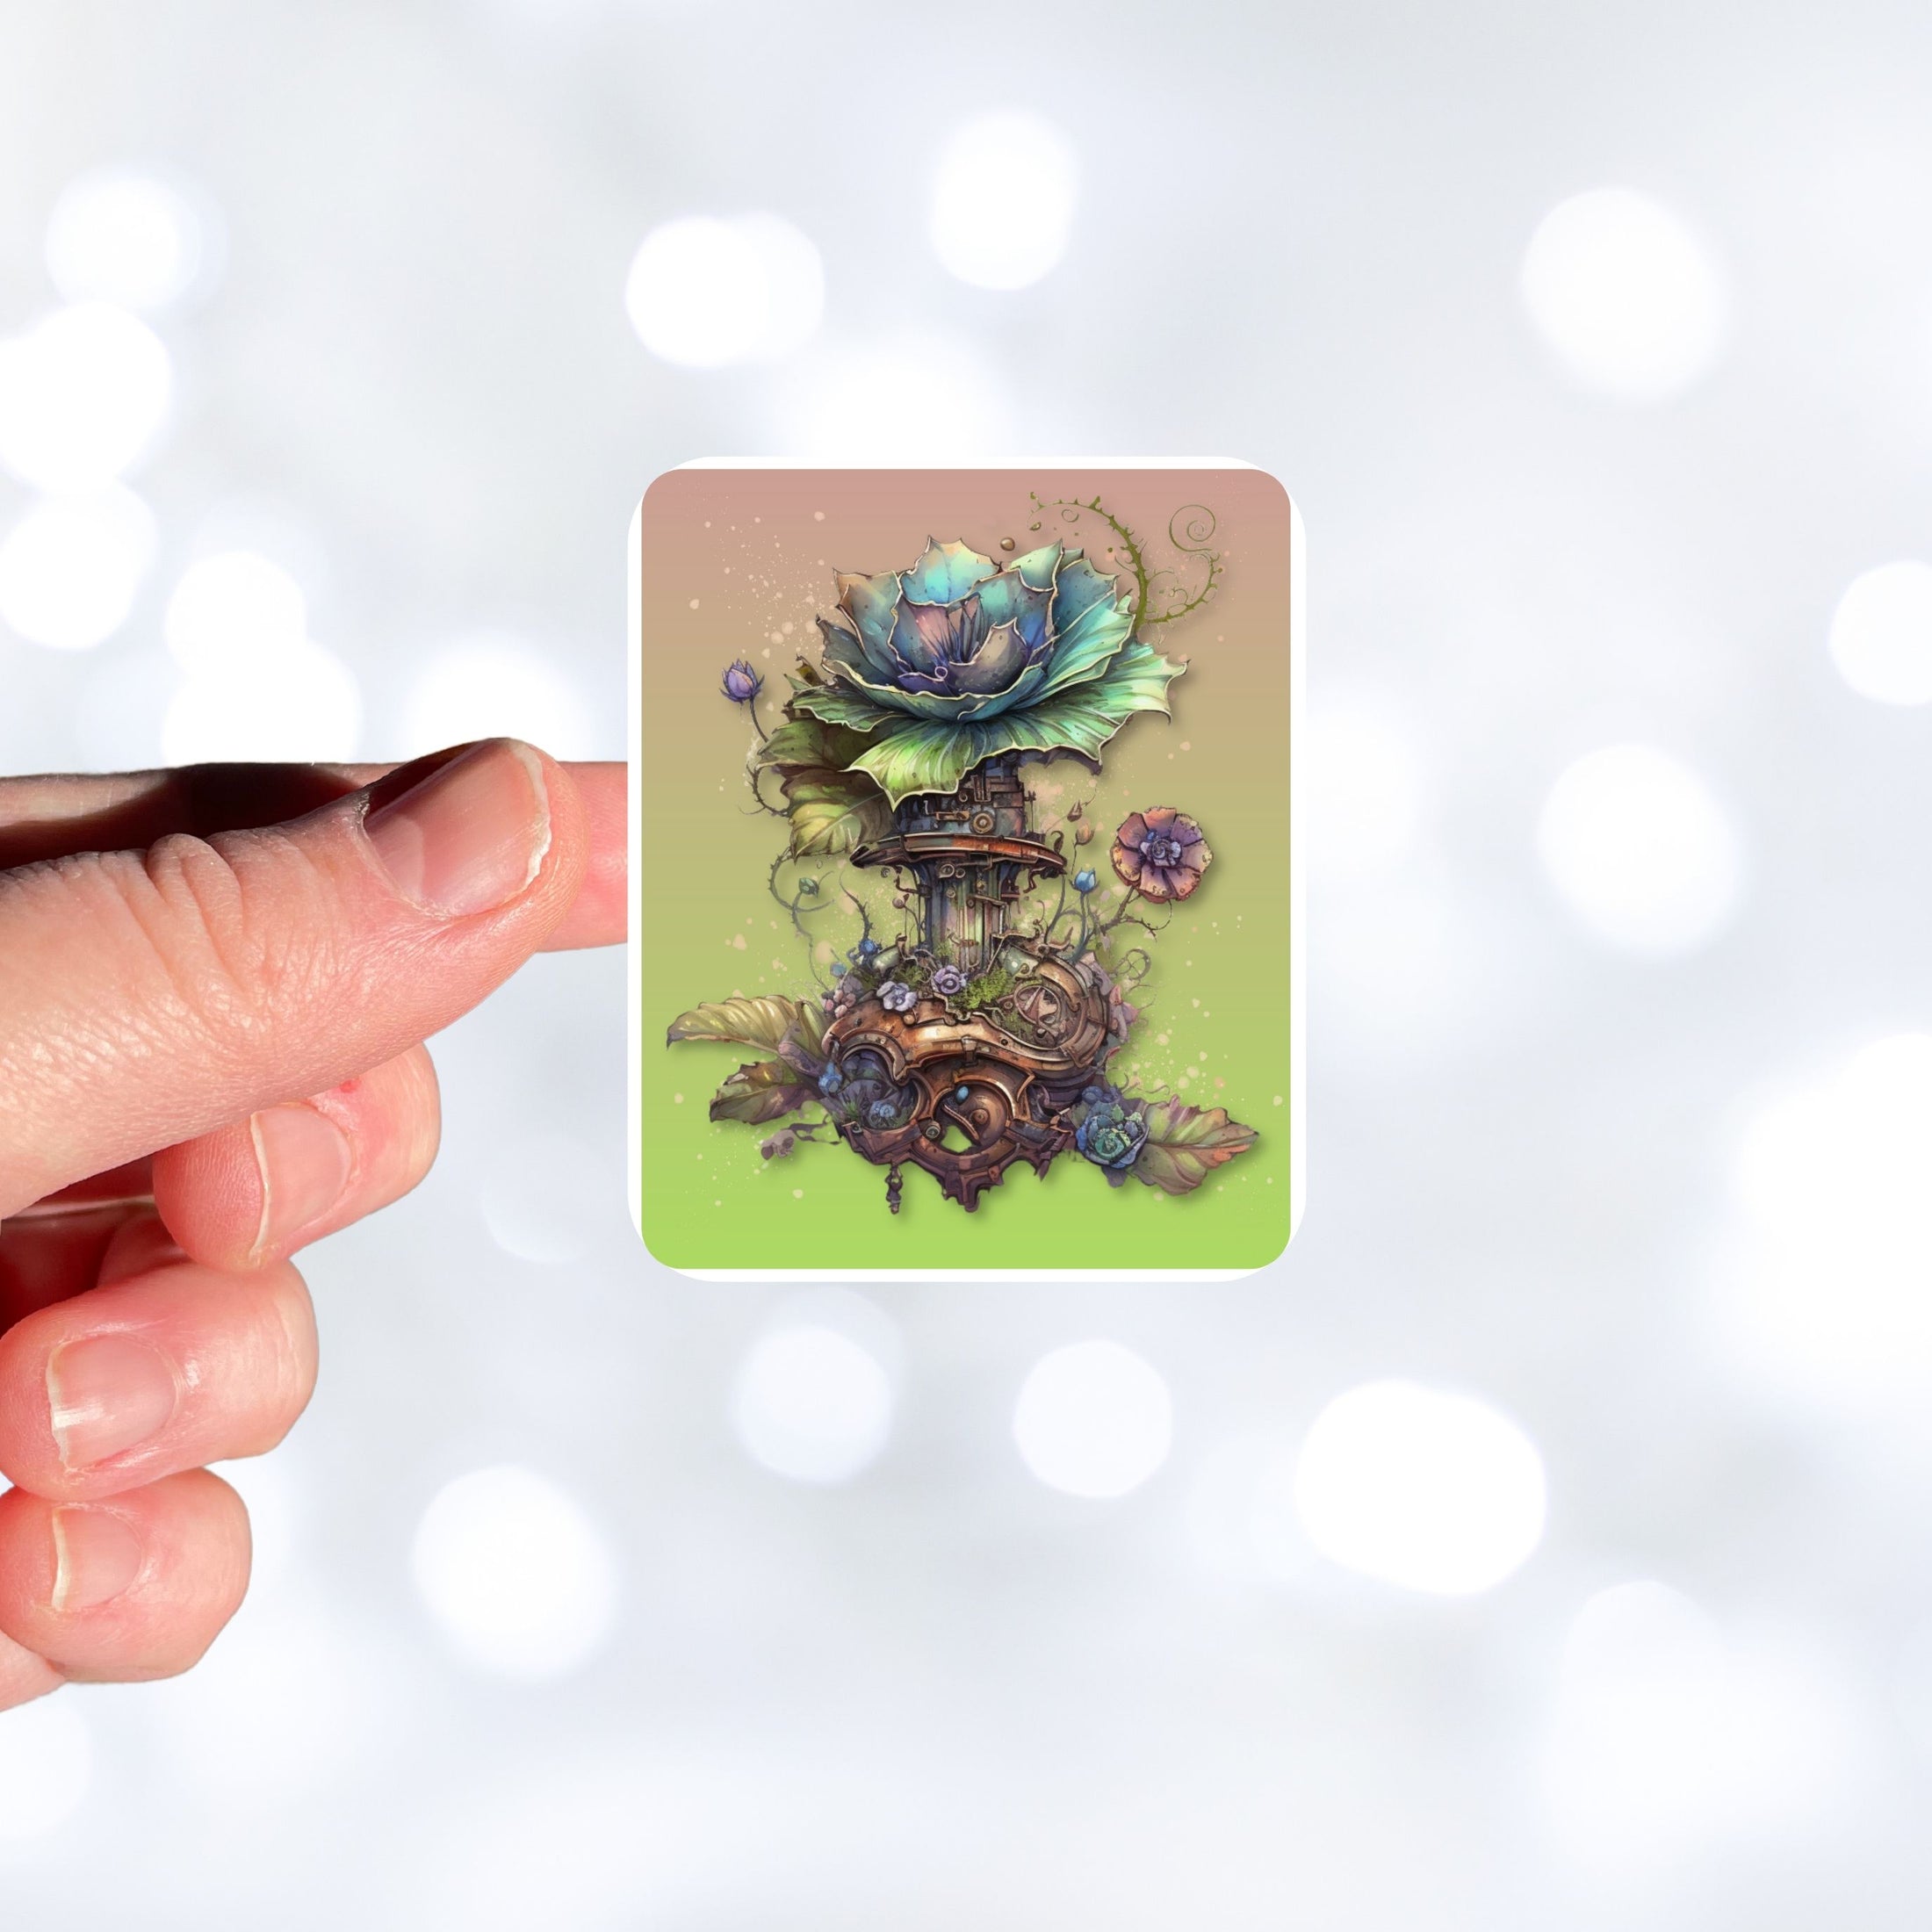 This image shows a hand holding the steampunk fantasy flower sticker.